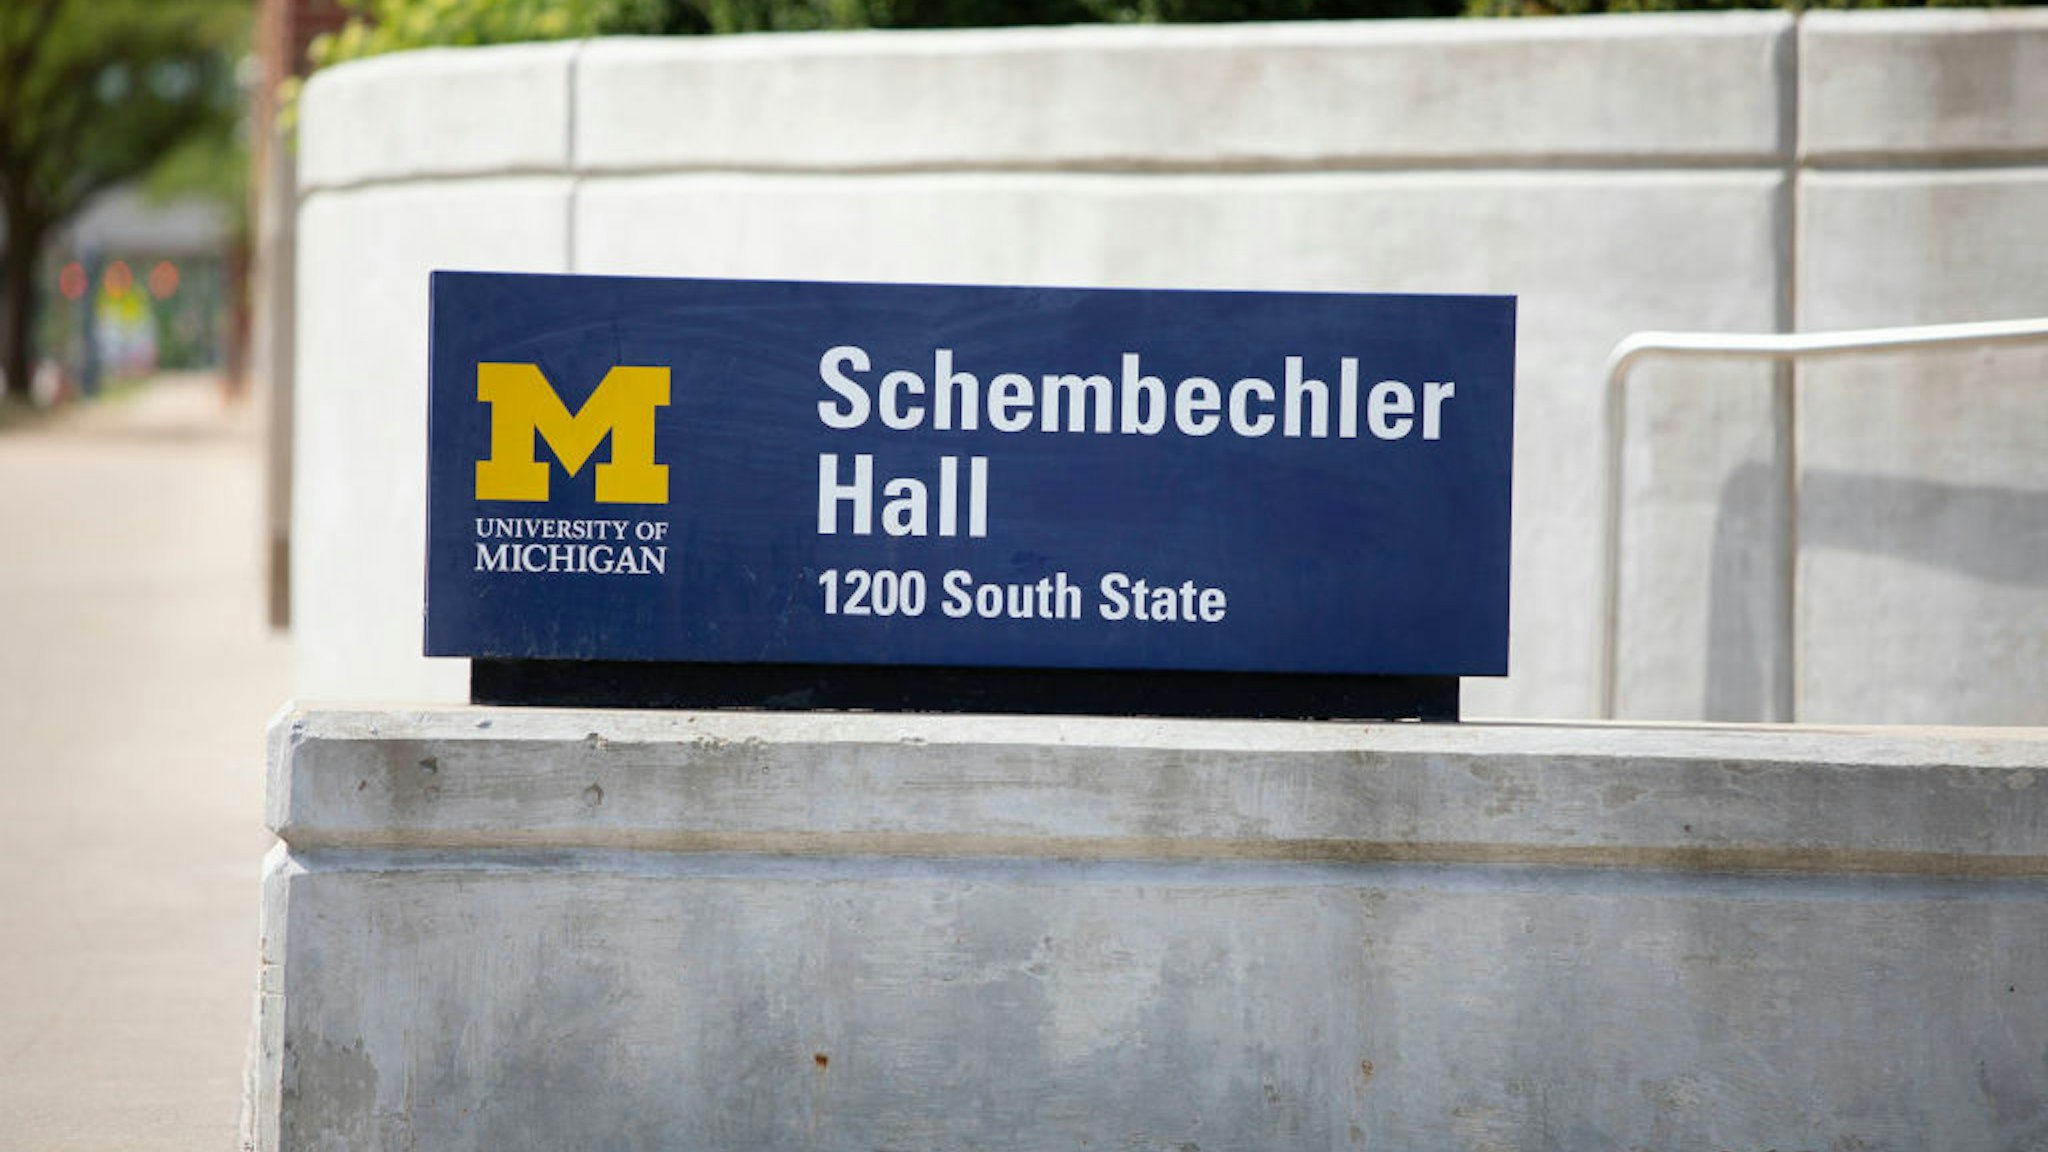 ANN ARBOR, MI - JUNE 16: A sign for Schembechler Hall, named for former University of Michigan football coach Bo Schembechler, is shown on the UM campus on June 16, 2021 in Ann Arbor, Michigan. Several dozen people are accusing the late Dr. Robert Anderson, former Head of University of Michigan Health Services and former UM football team doctor, of sexually abusing or sexually assaulting them. Matthew Schembechler, son of former Michigan football coach Bo Schembechler, and others have claimed they had notified Bo Schembechler about the abuse and that he had done nothing about it. Dr. Anderson passed away in 2008.